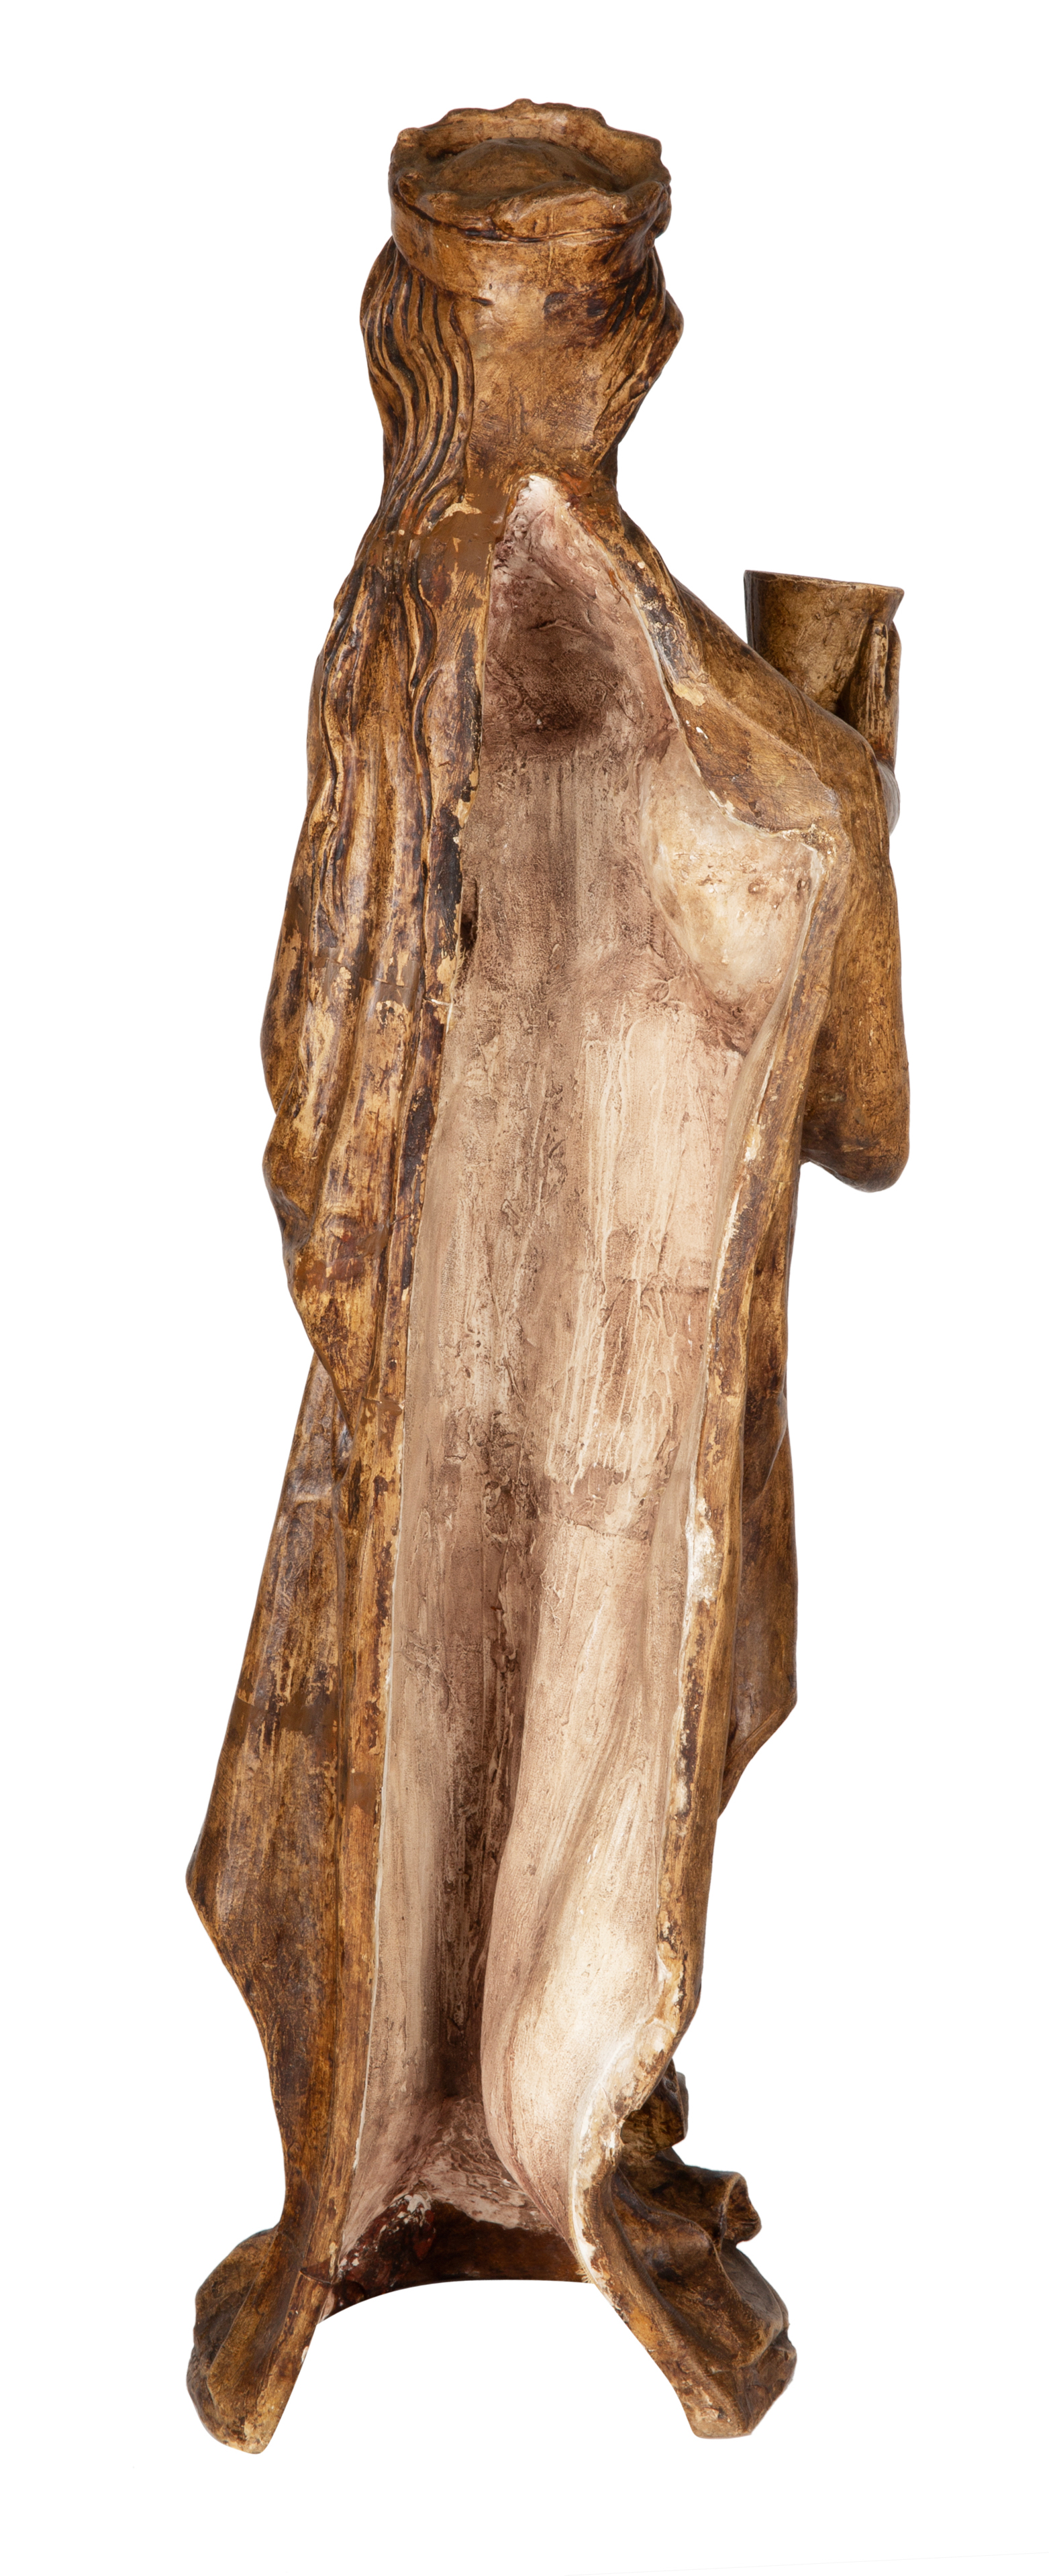 A LARGE PATINATED PLASTER CAST OF ECCLESIA, LIKELY GERMAN, 19TH CENTURY - Image 2 of 2